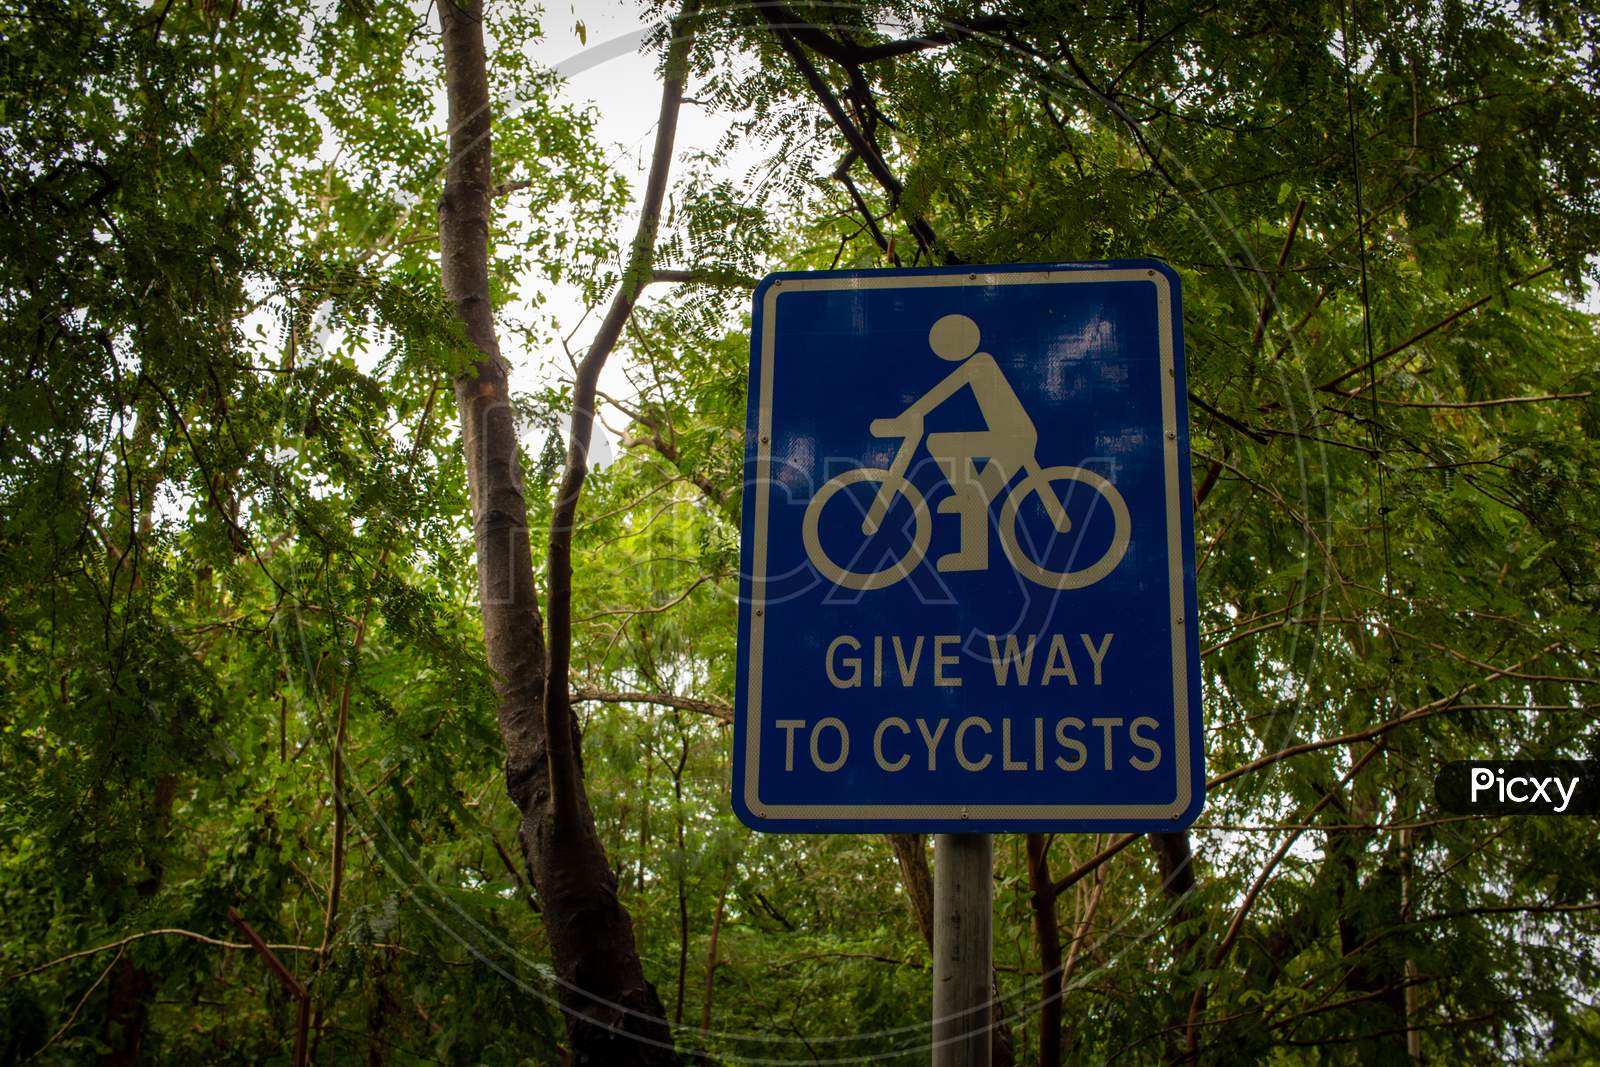 View Of Give Way Sign To Cyclists Board. Alerting Road Users To Give Way Or Yield For Cyclists